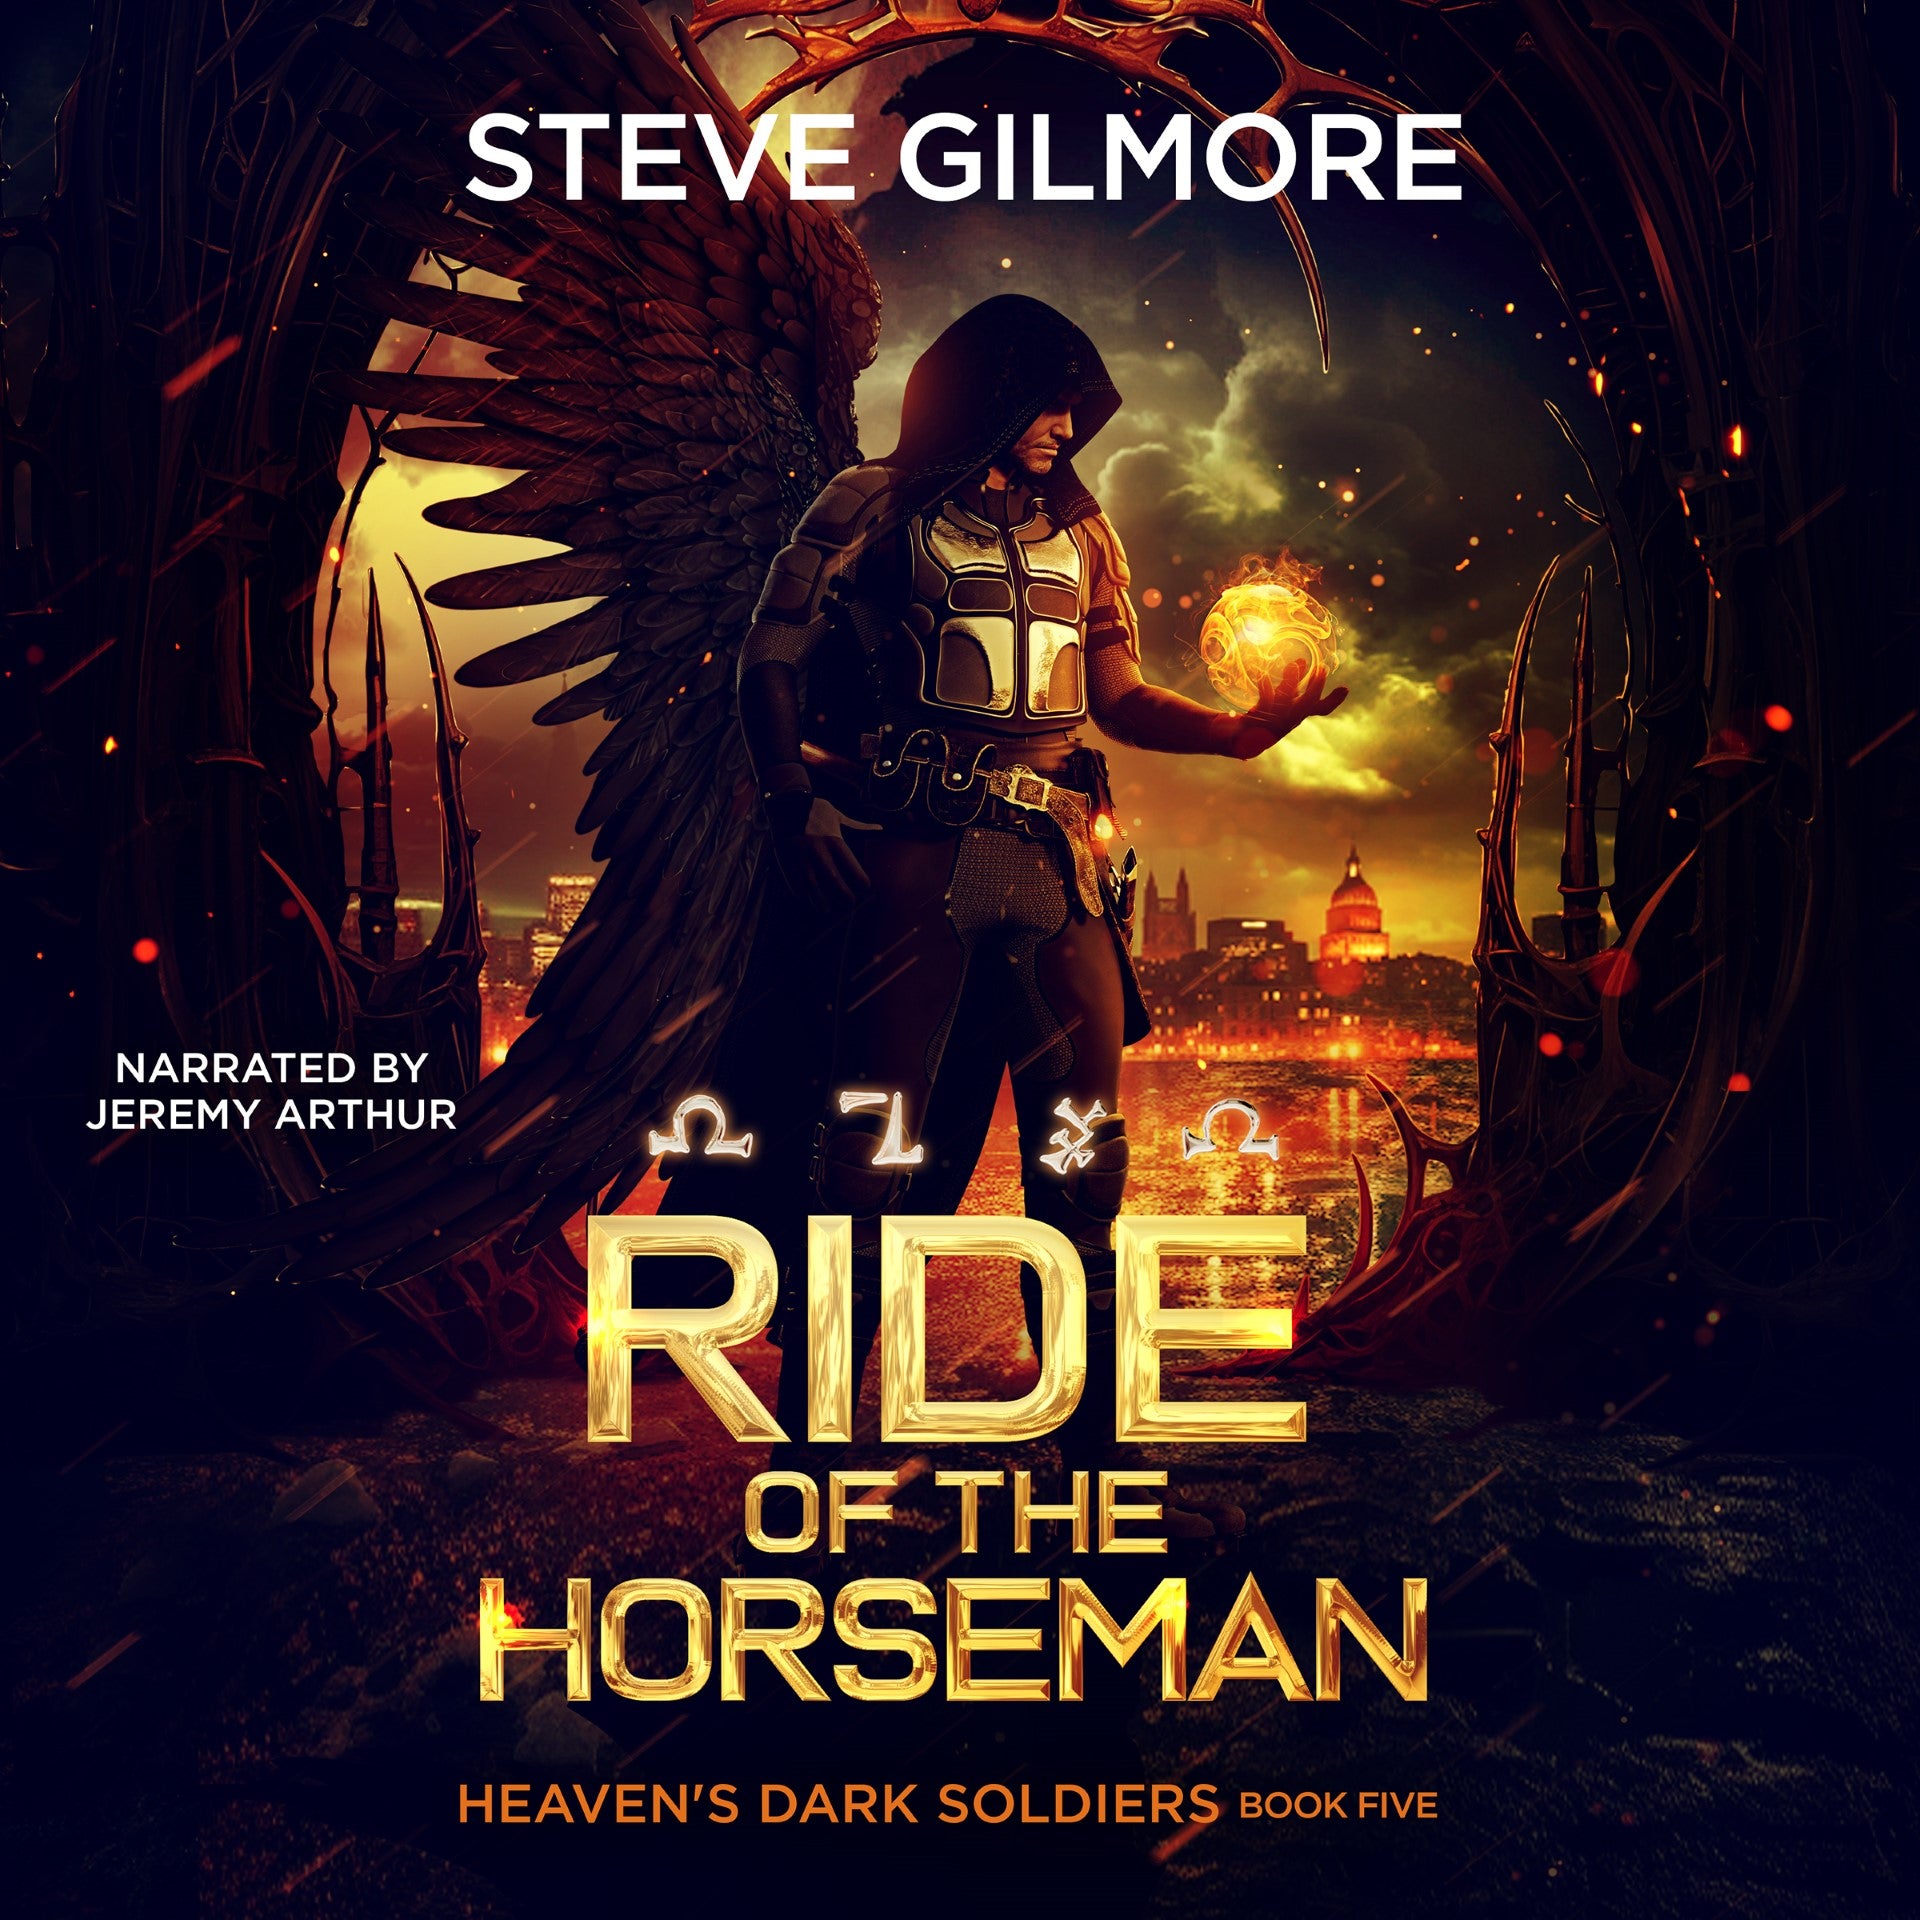 Ride of the Horseman (Heaven's Dark Soldiers Book 5) Audiobook Narrated by Jeremy Arthur